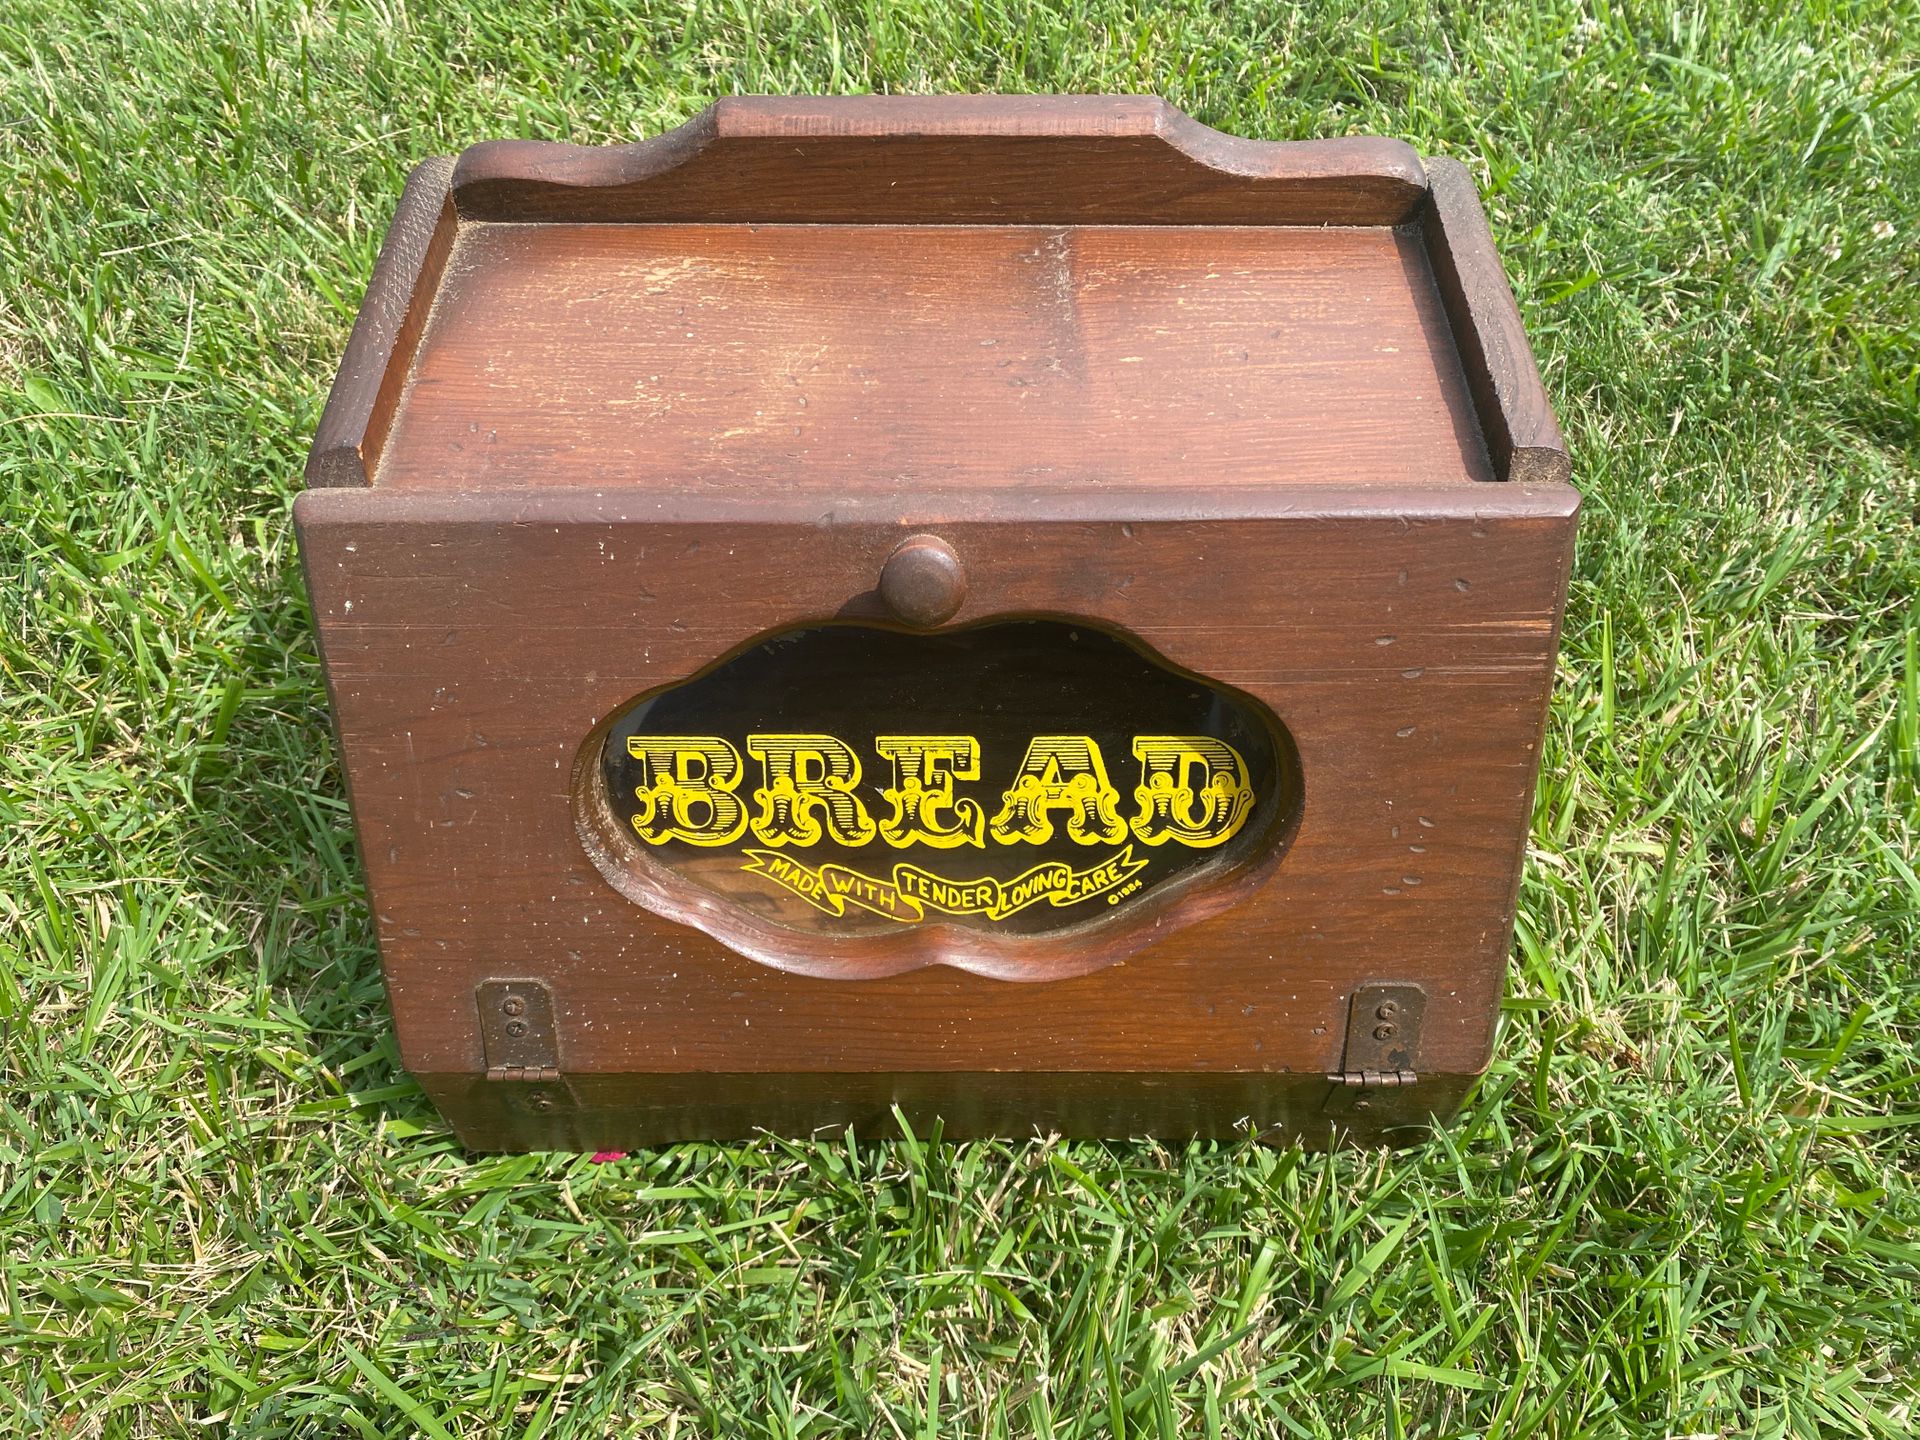 Vintage Wooden Bread Box With Window & Yellow Graphics - 15” x 11” x 11”